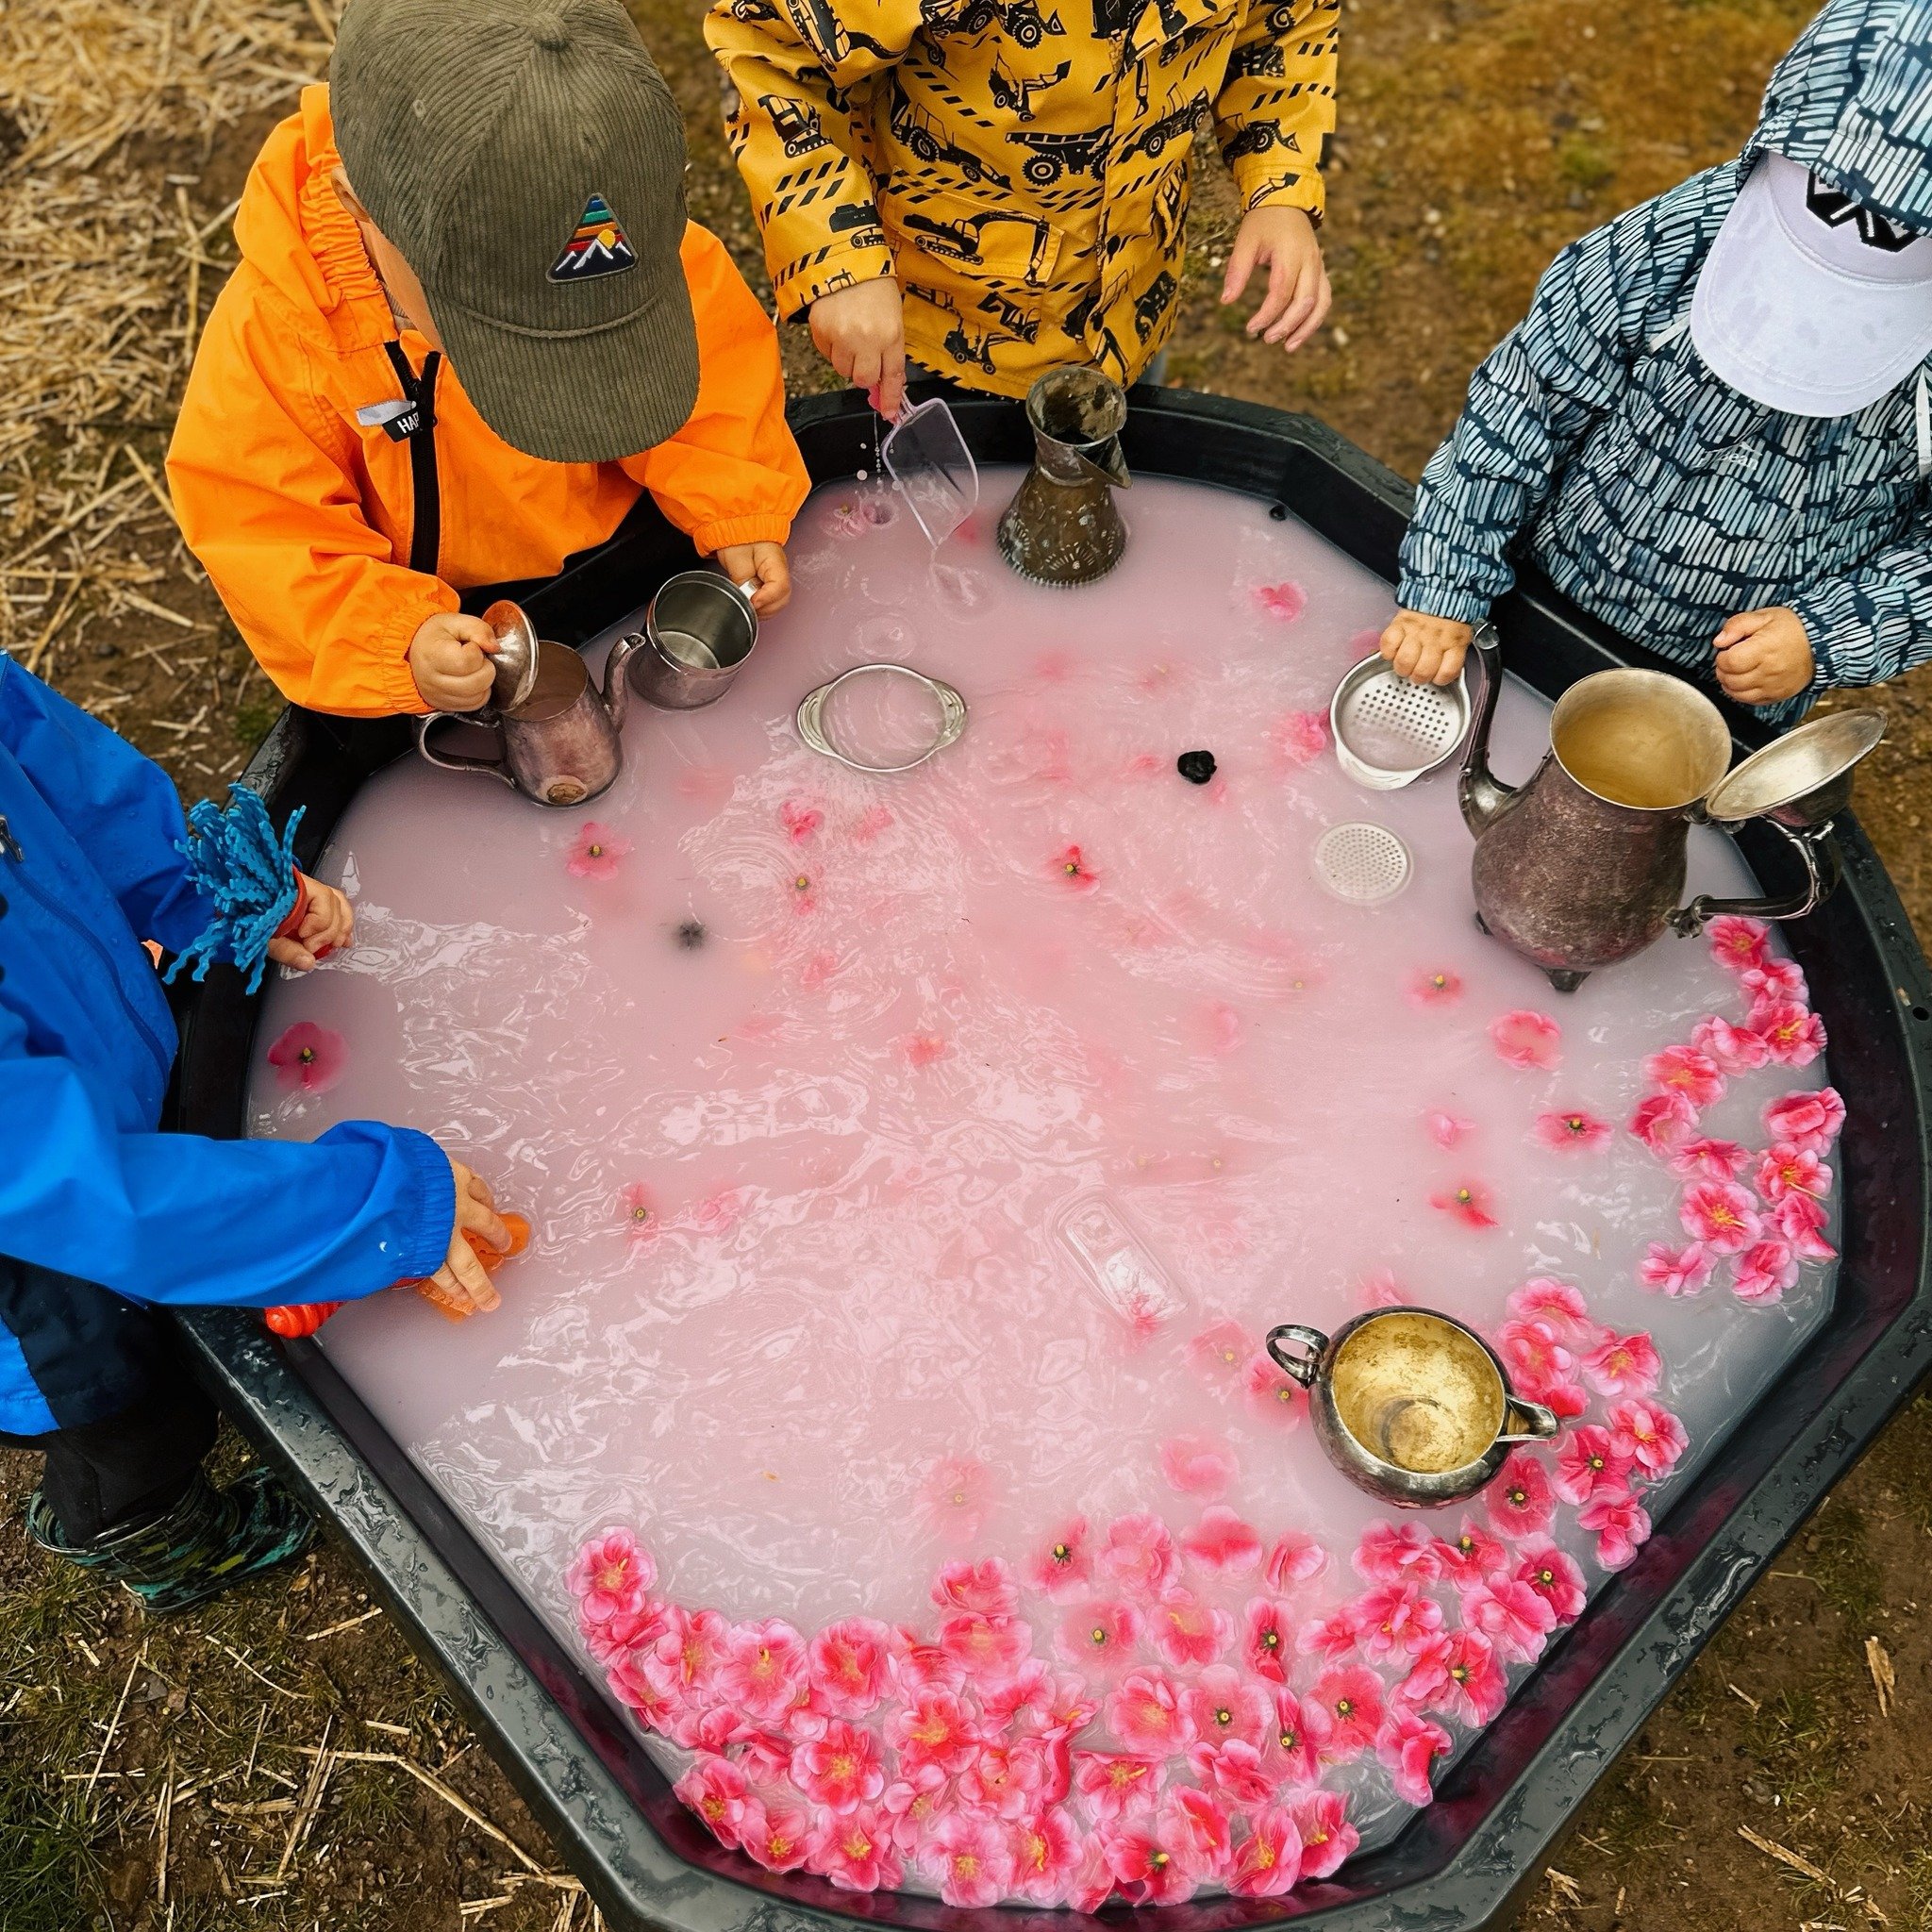 Rainy day magic with our Little Lunas explorers! 🌧️🌸

Today, we embraced the weather with open arms and immersed ourselves in the beauty of cherry blossoms. Our tuff tray was transformed into a wonderland of pink &amp; white, and plenty of toys bro